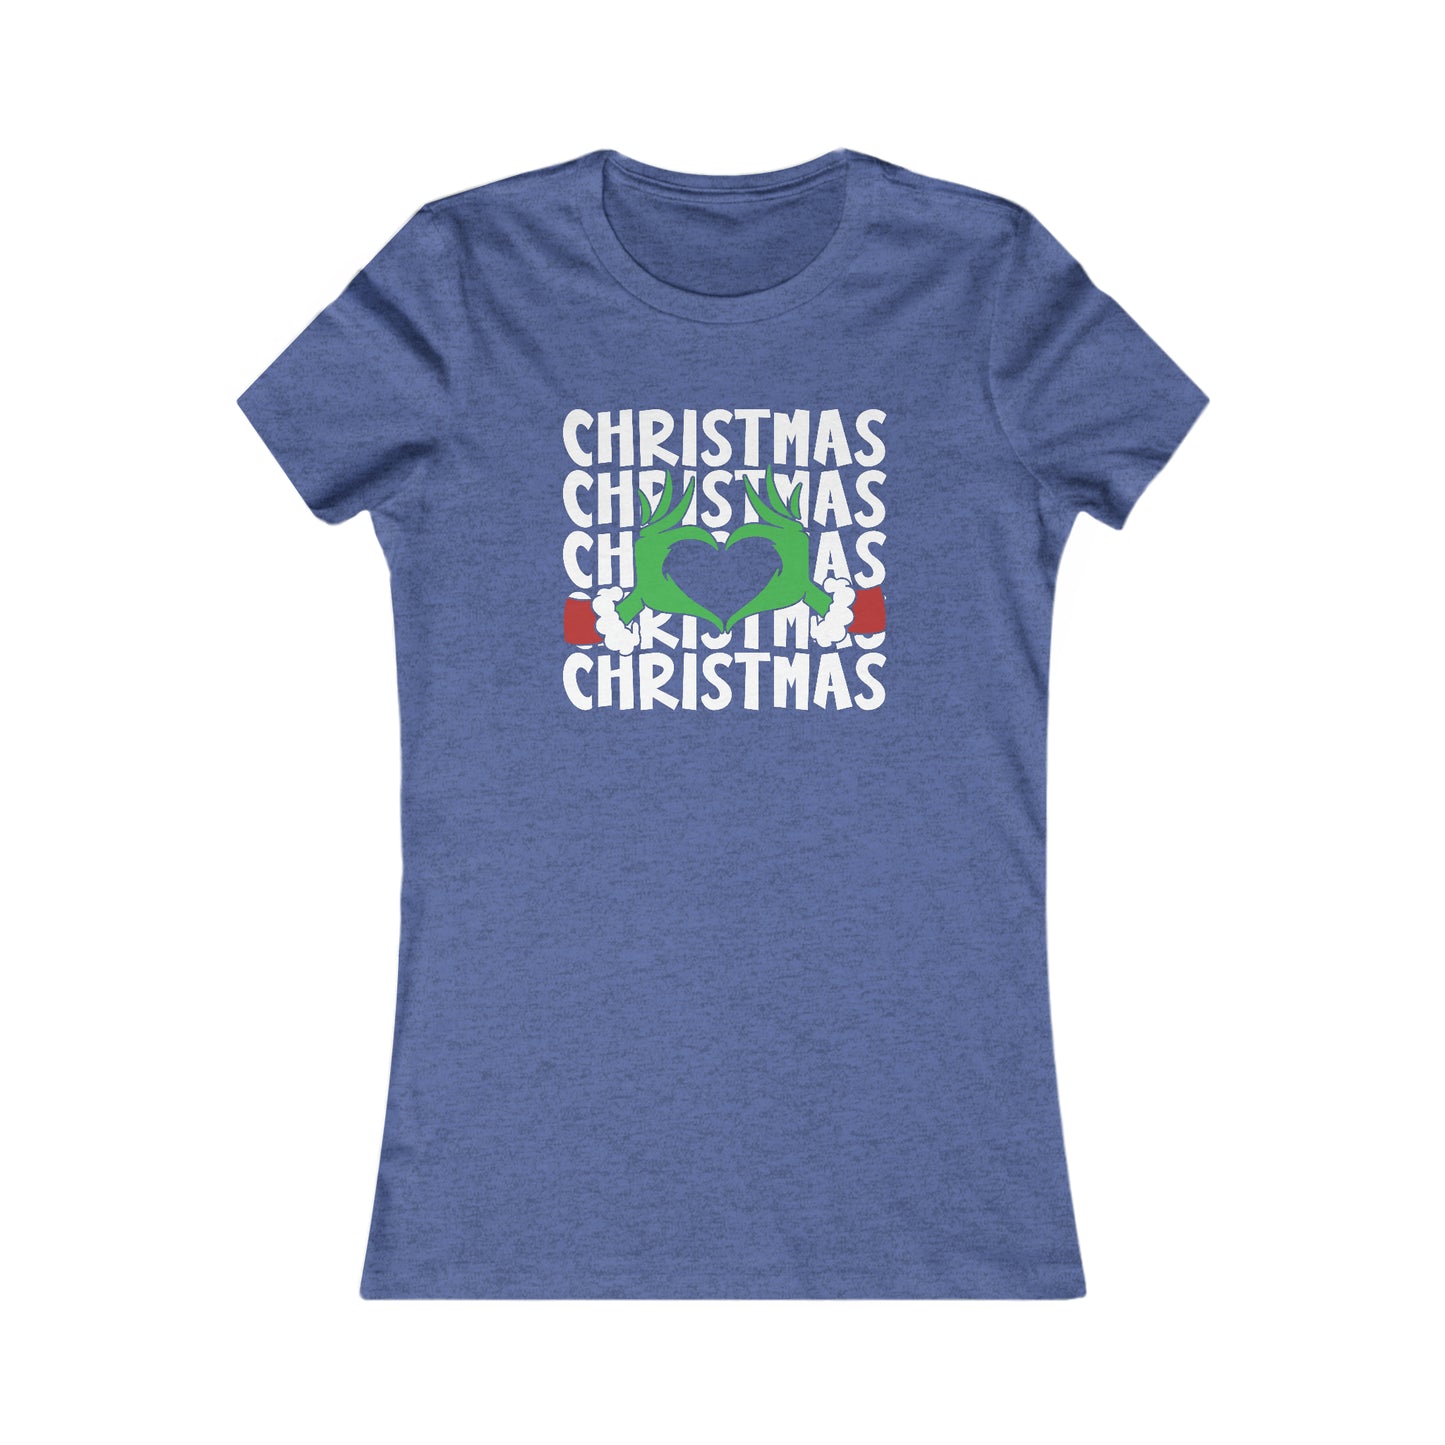 Grinch T-Shirt For Merry Christmas TShirt For Heart T Shirt For Cute Holiday Tee For Women